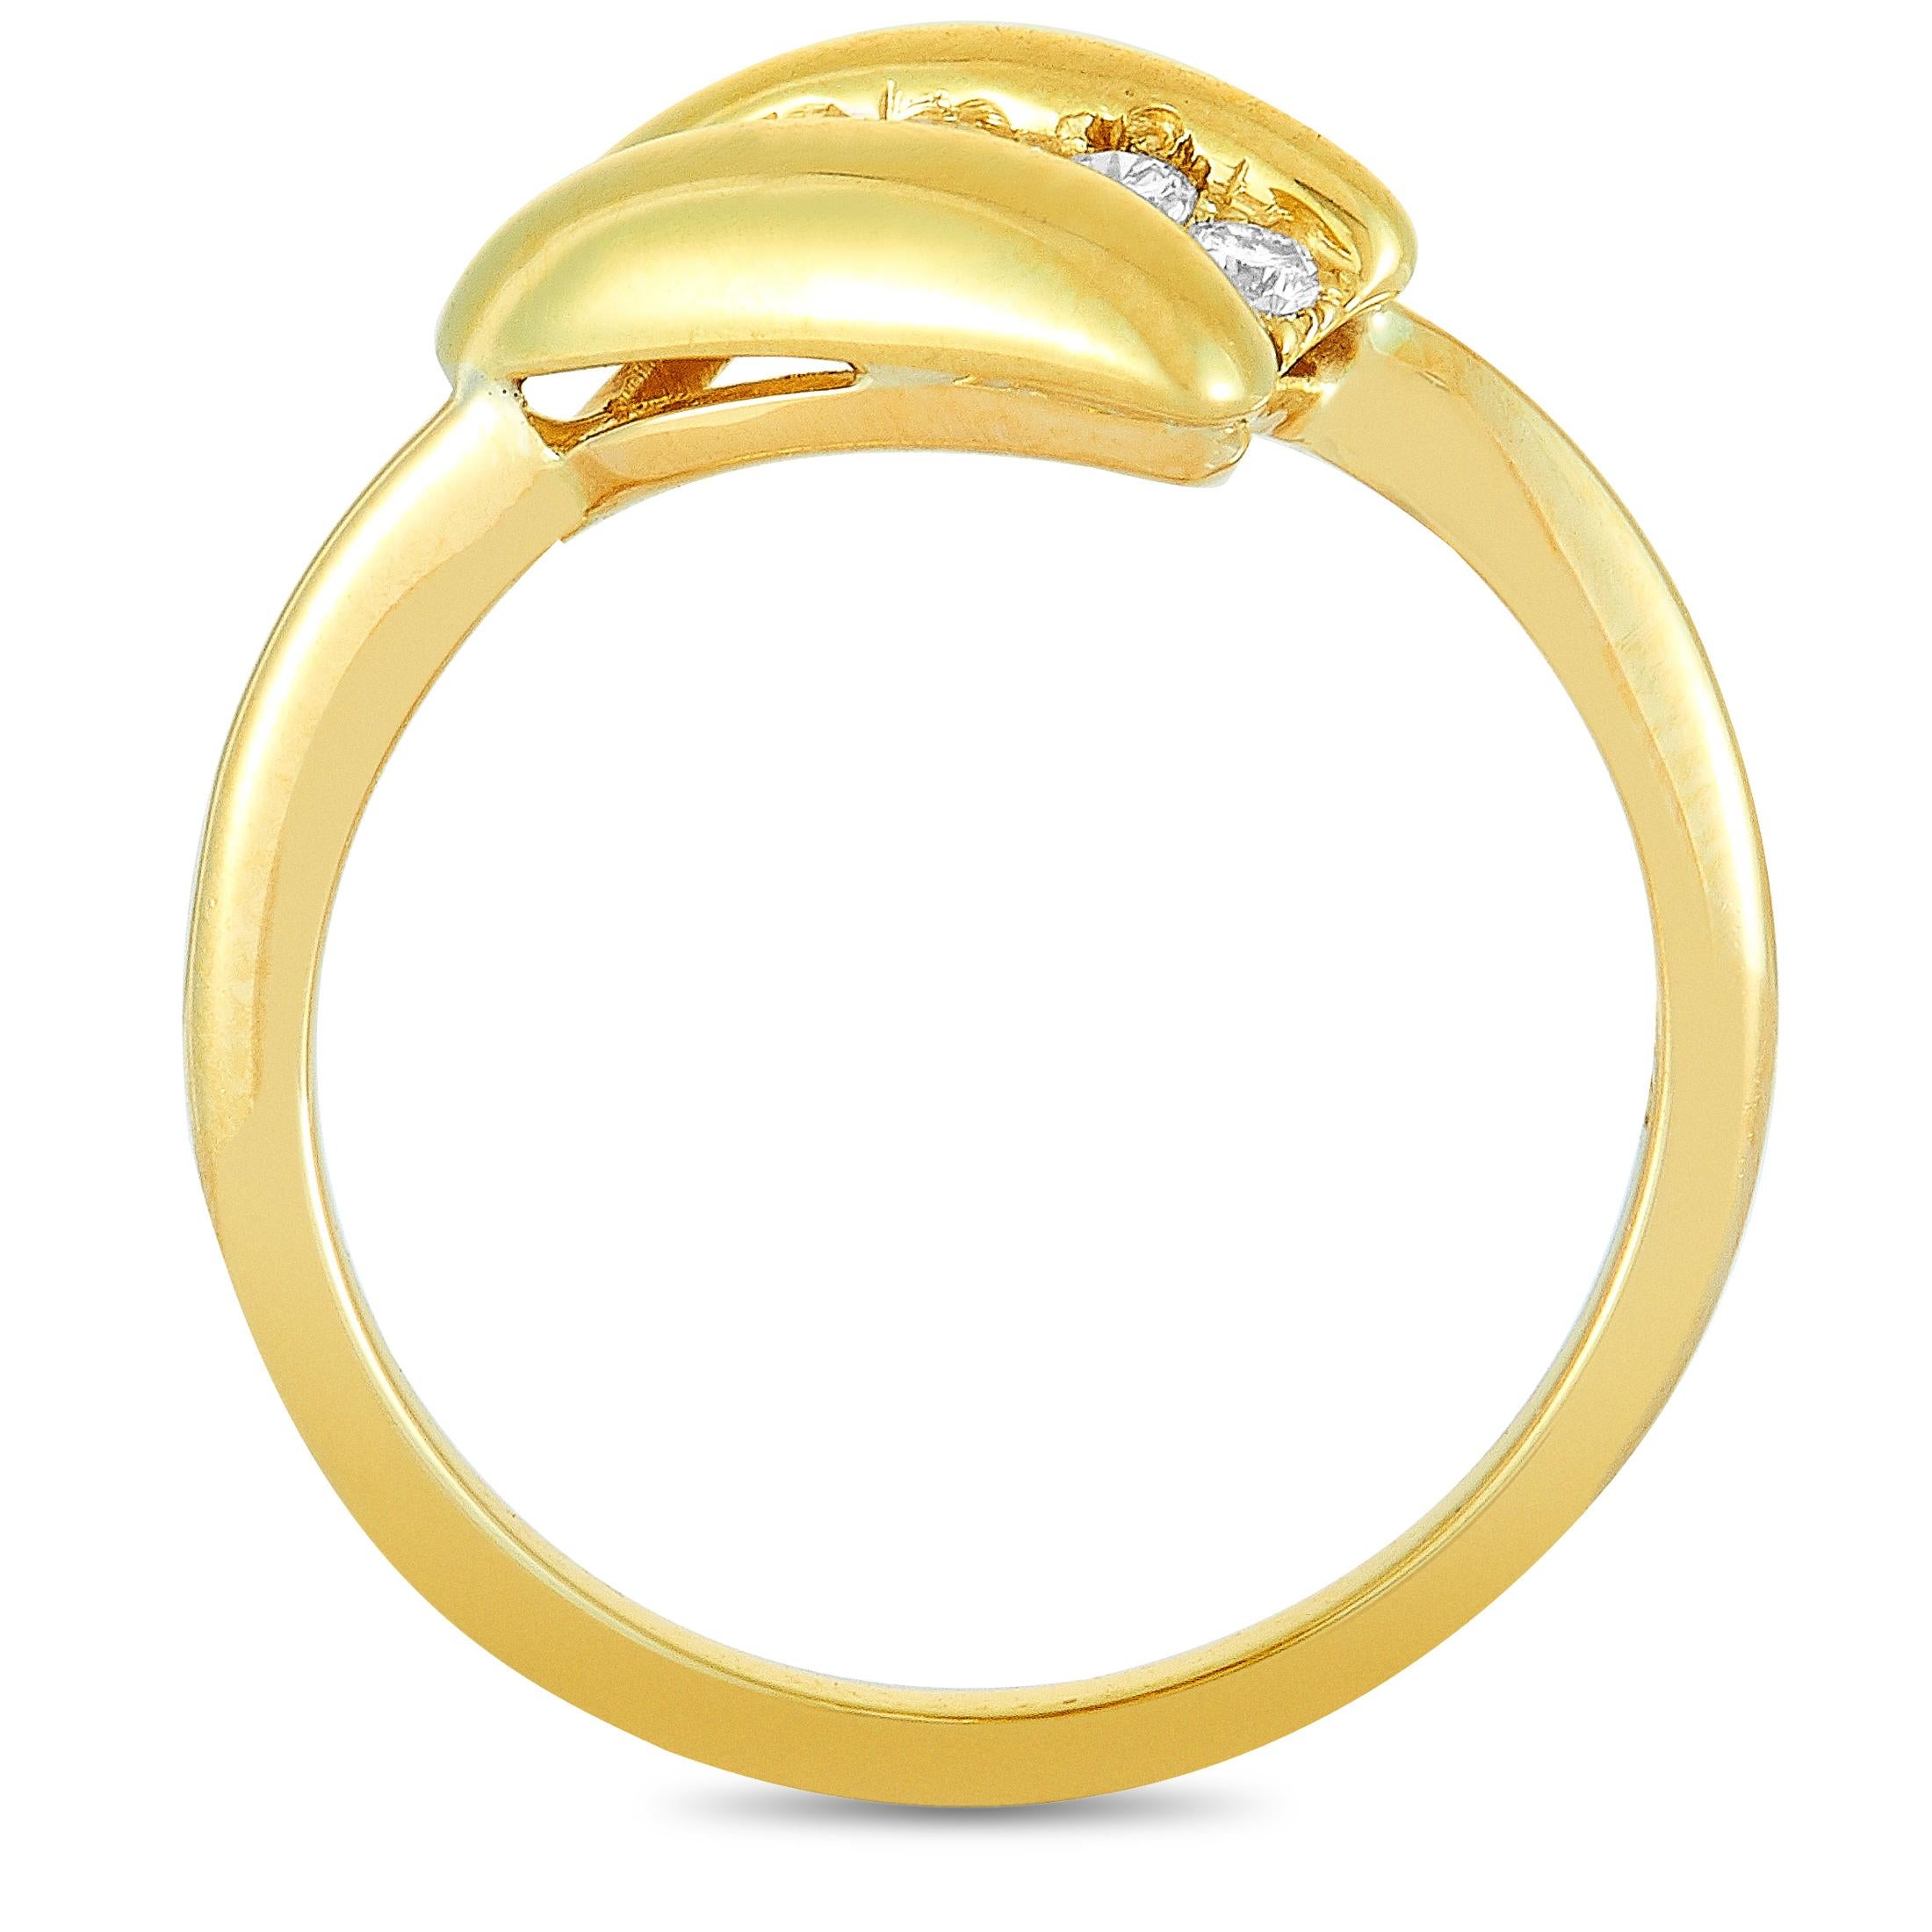 This Tiffany & Co. ring is made out of 18K yellow gold and diamonds that total 0.25 carats. The ring weighs 4.1 grams, boasting band thickness of 1 mm and top height of 3 mm, while top dimensions measure 11 by 17 mm.

Offered in estate condition,